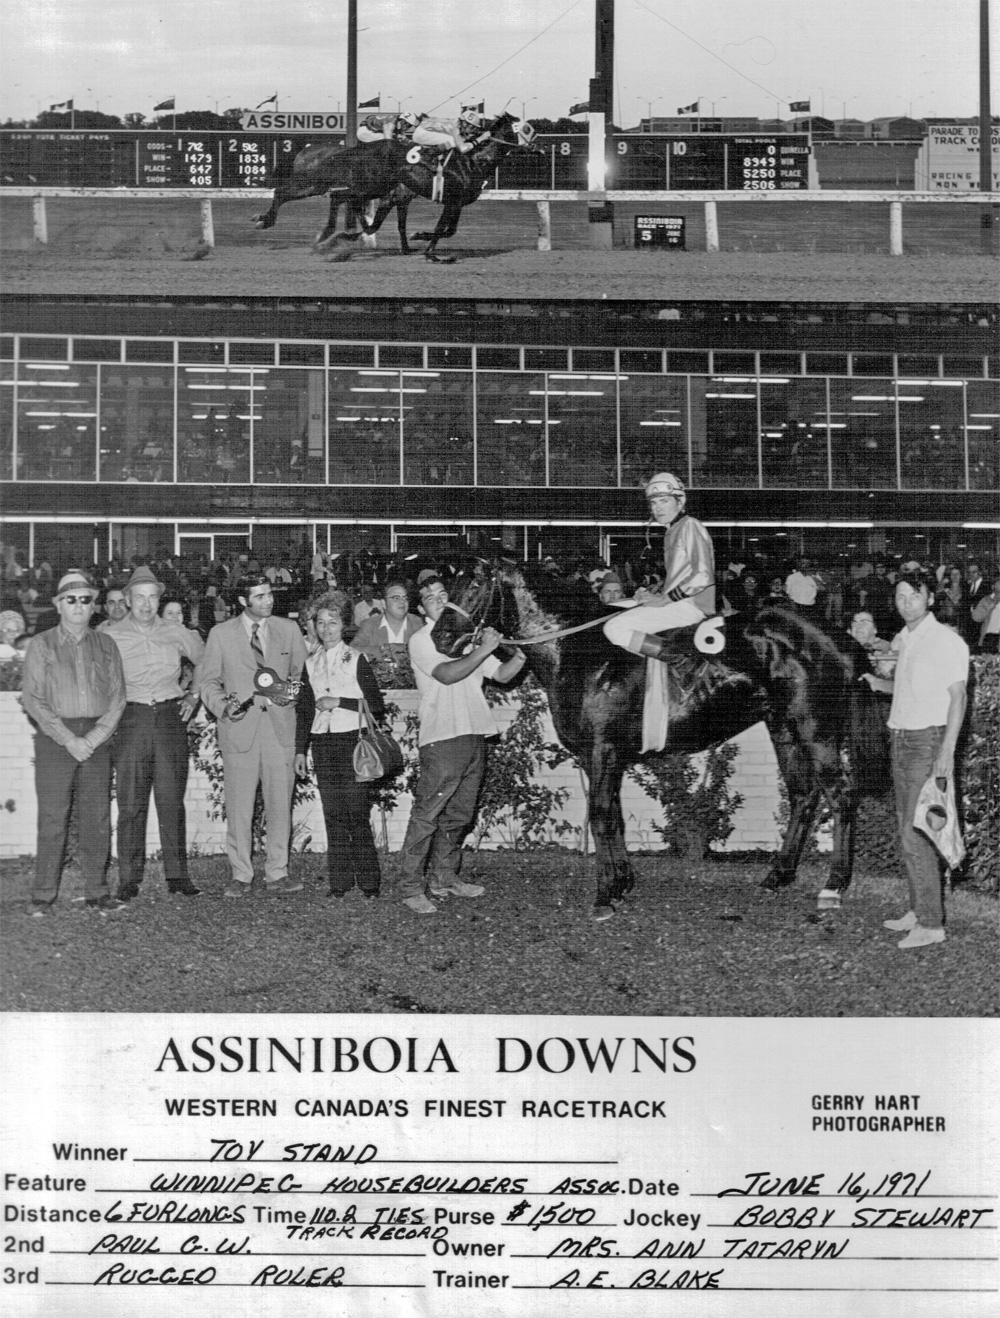 Toy Stand equals six-furlong track record at Assiniboia Downs. June 16, 1971. 